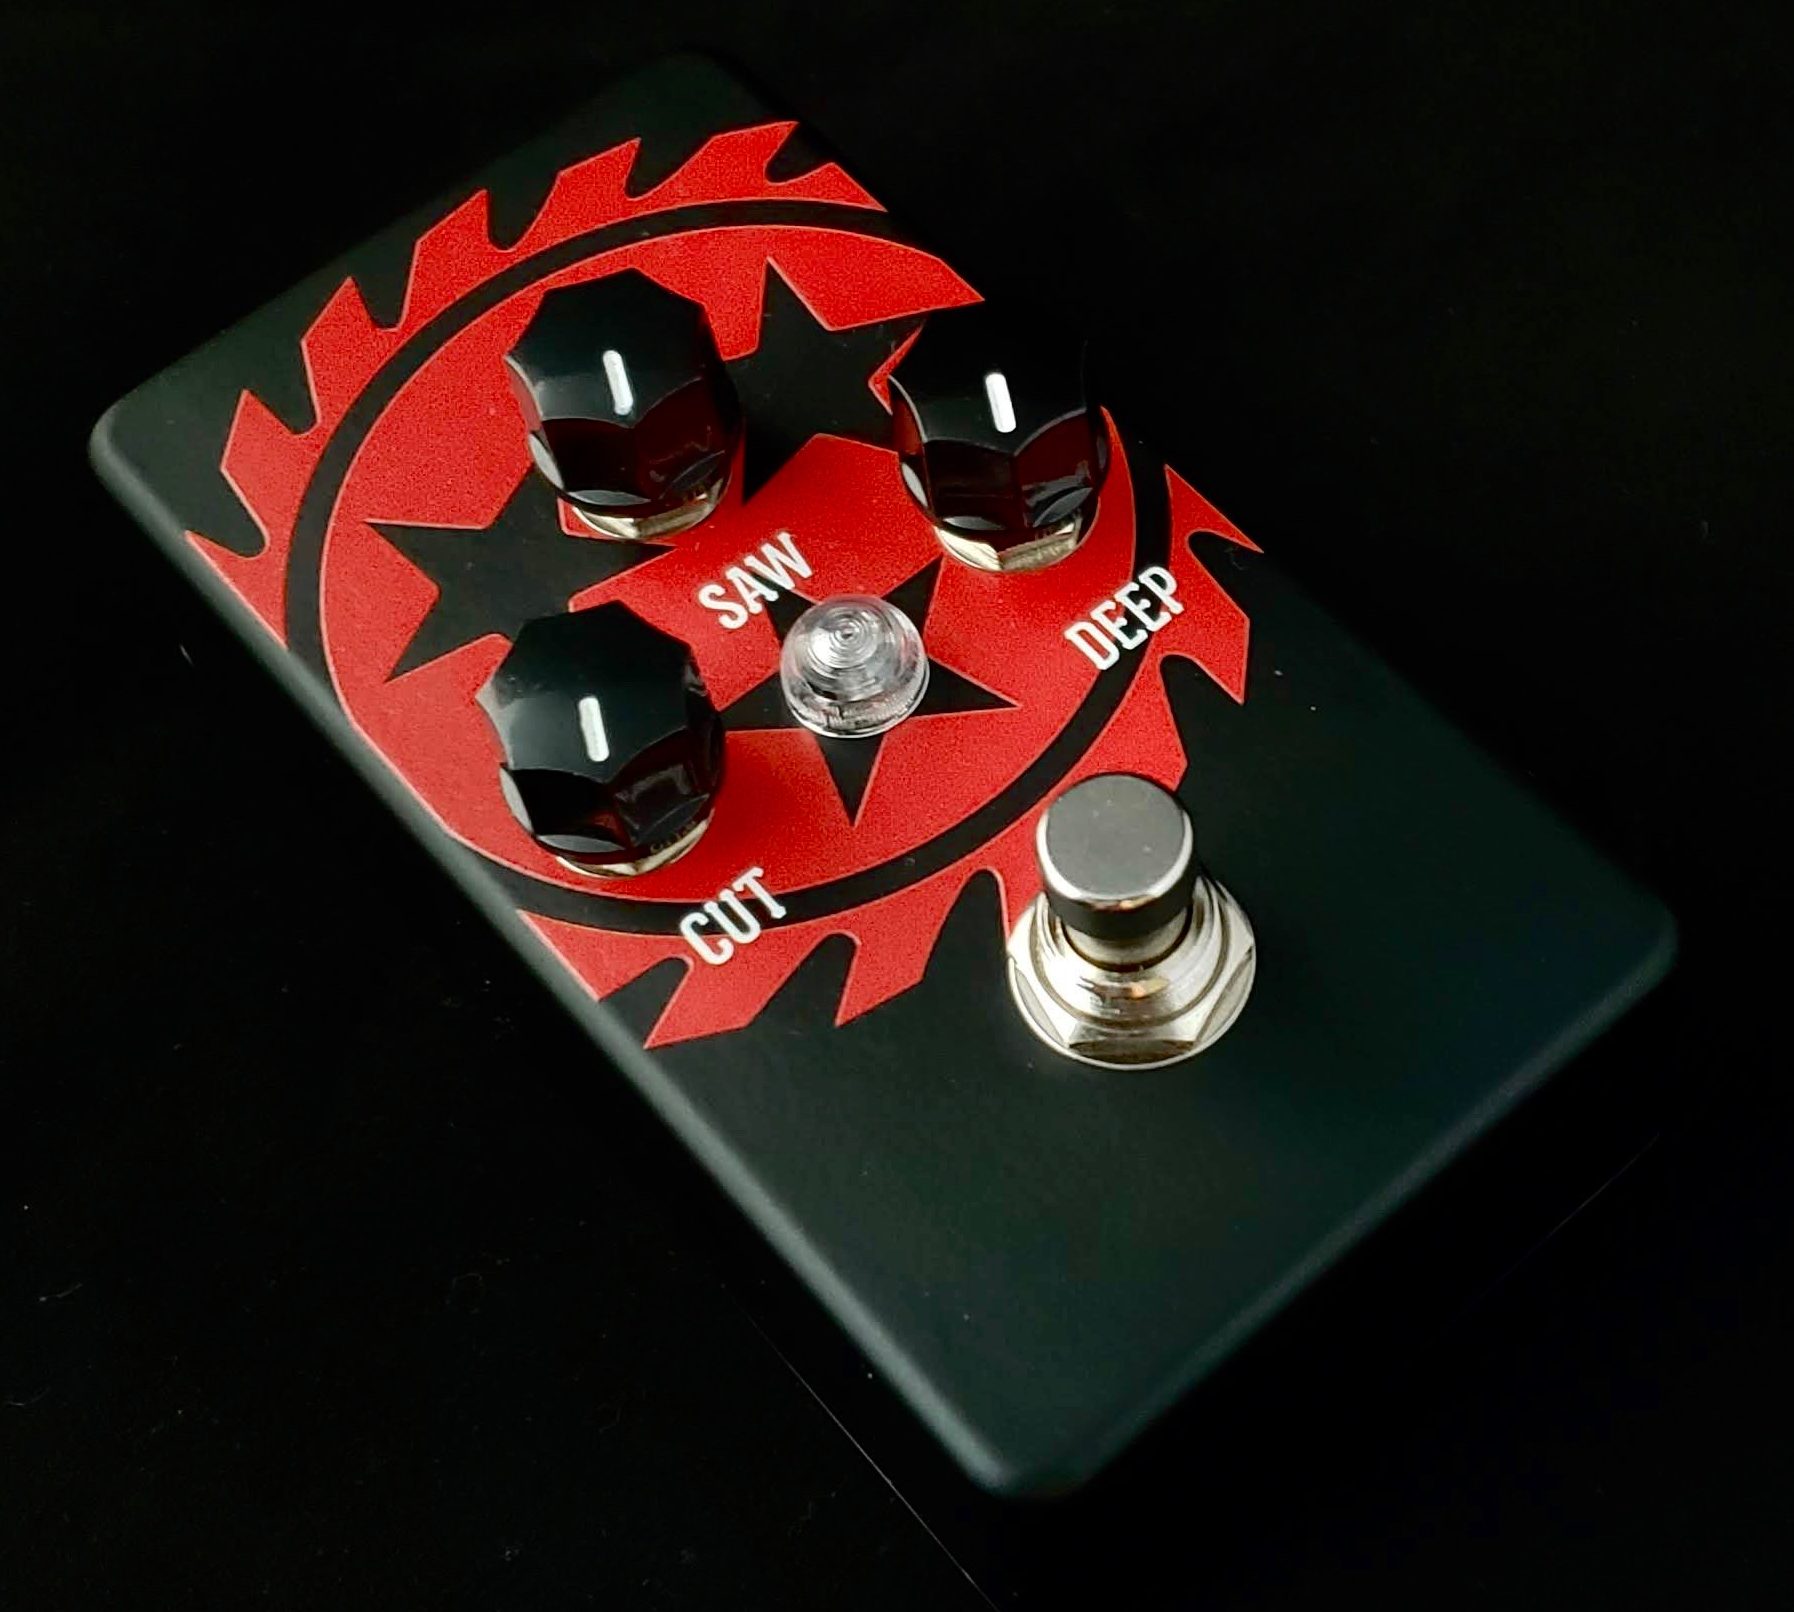 Fortin Amps Whitechapel Blade Boost Signature Pedal - PÉdale Volume / Boost. / Expression - Variation 1